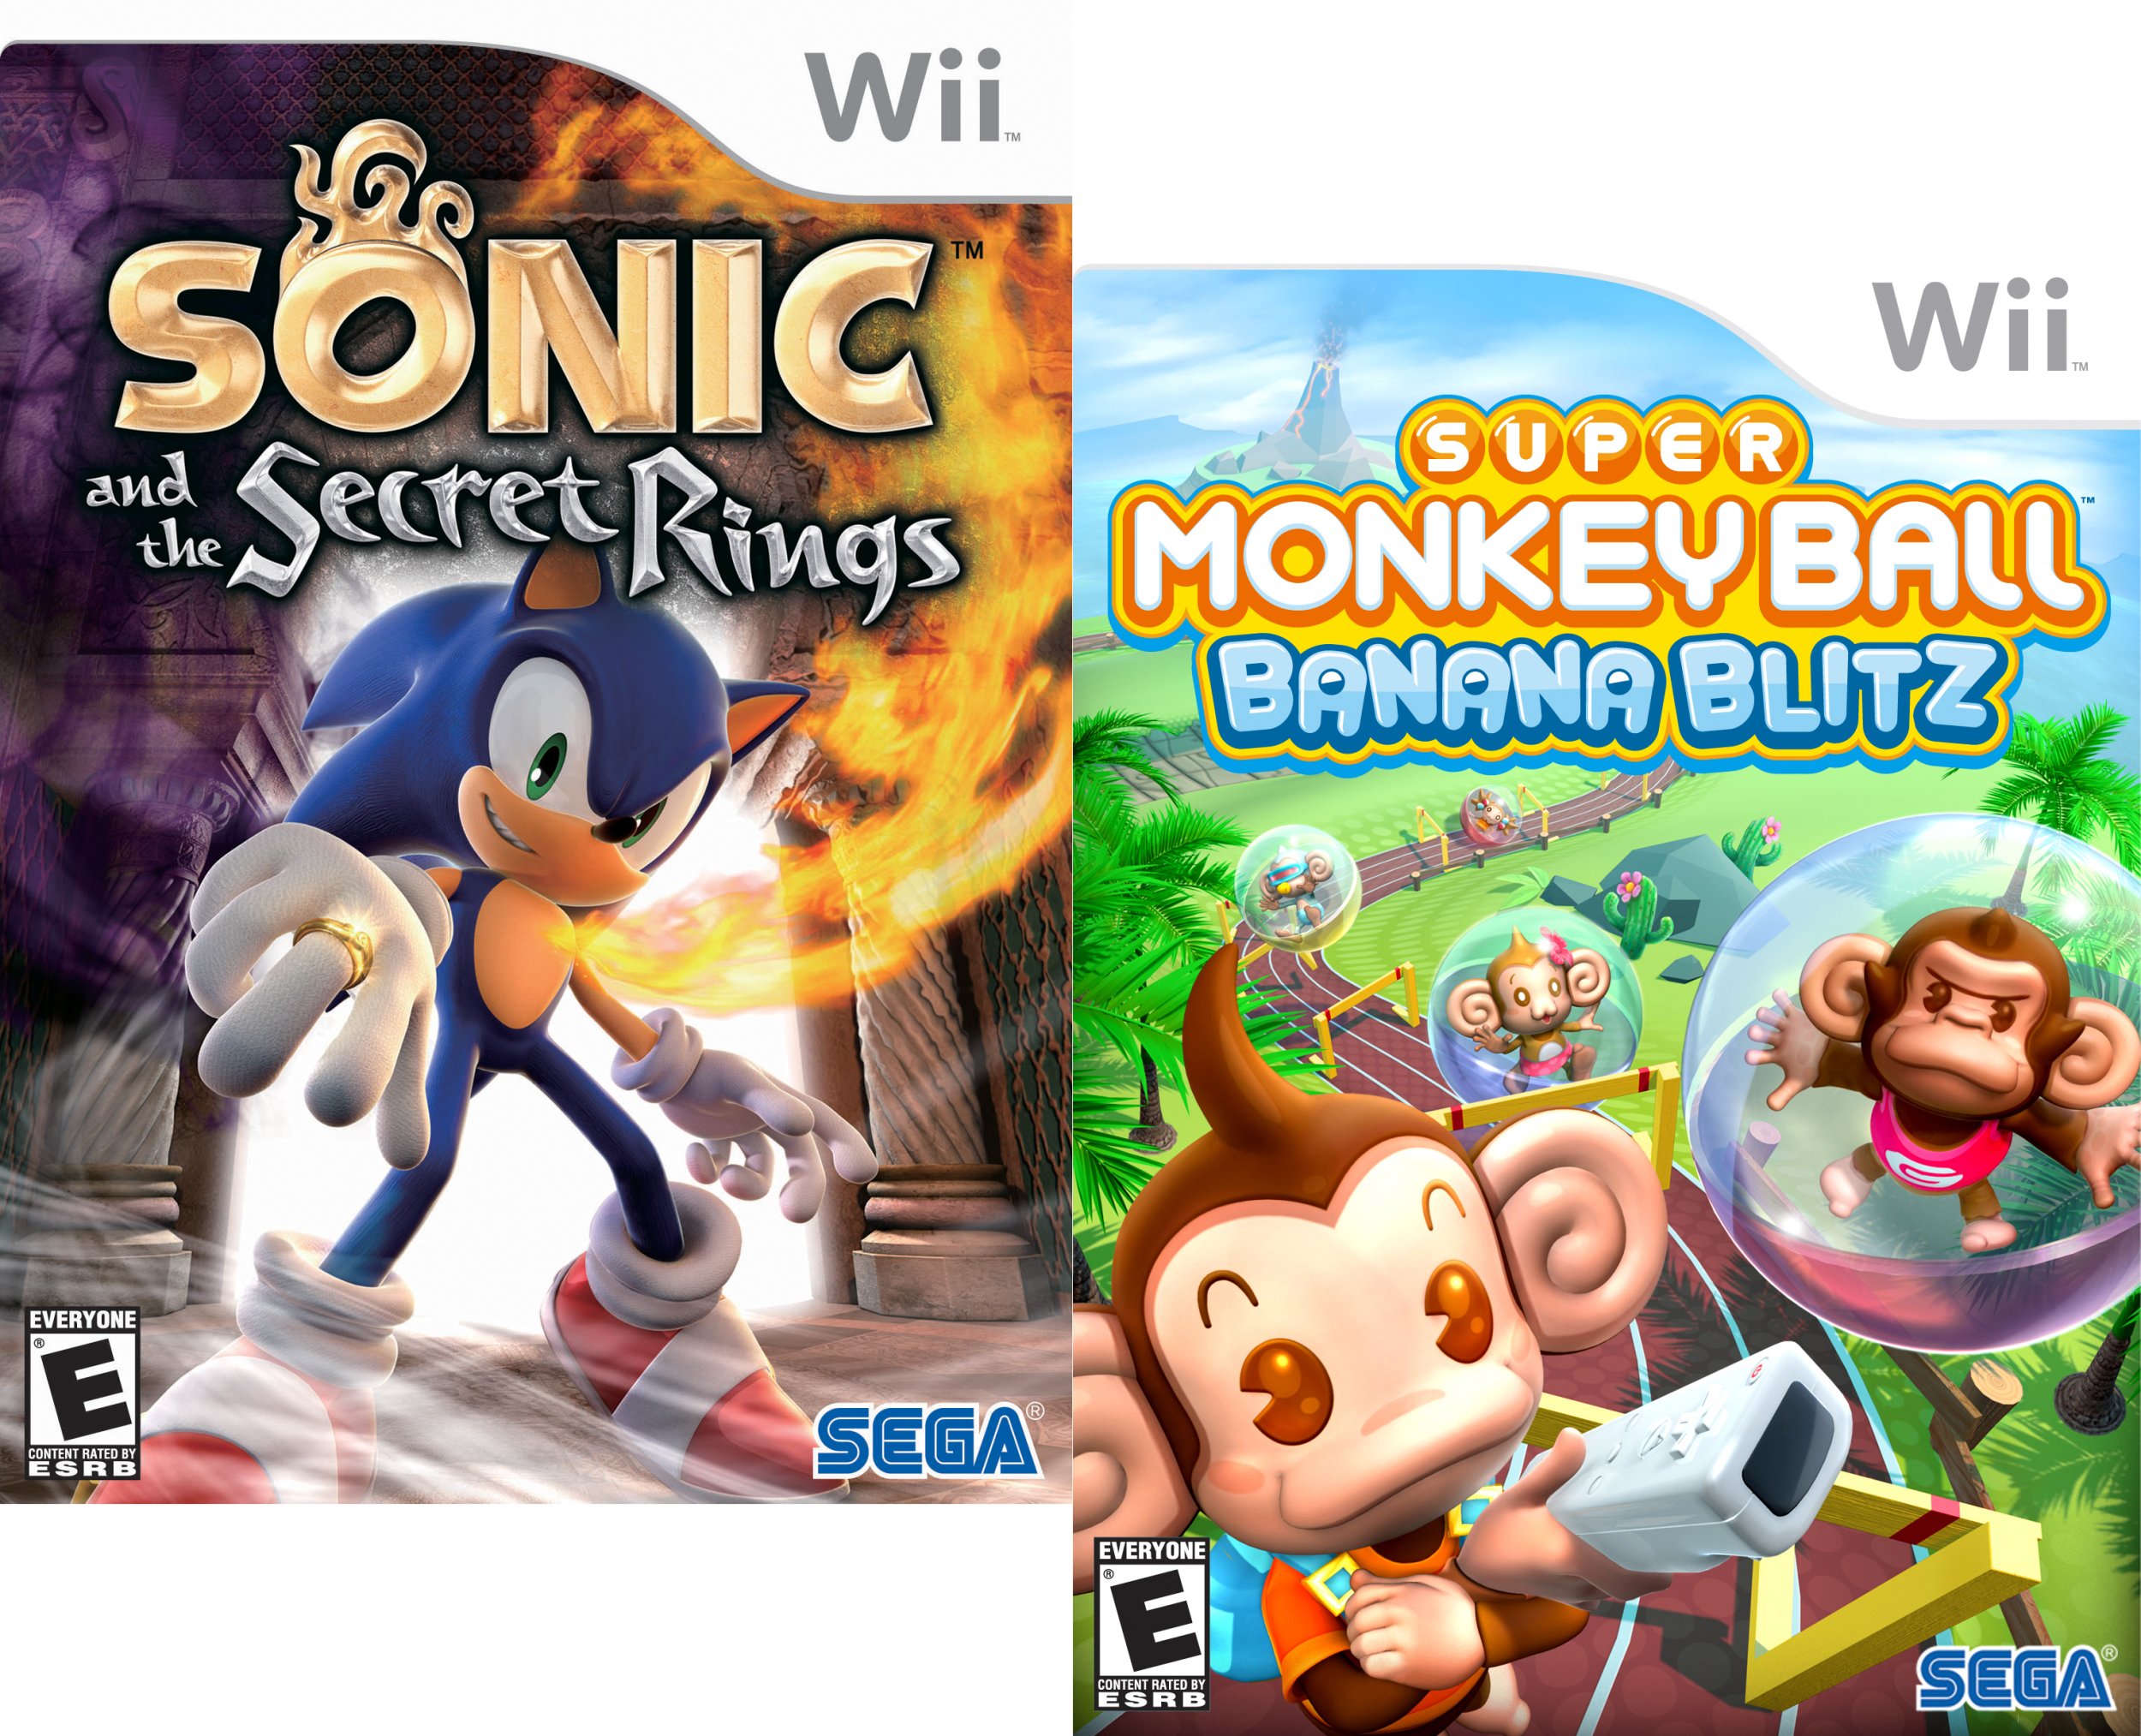  Sonic and the Secret Rings - Wii : Video Games